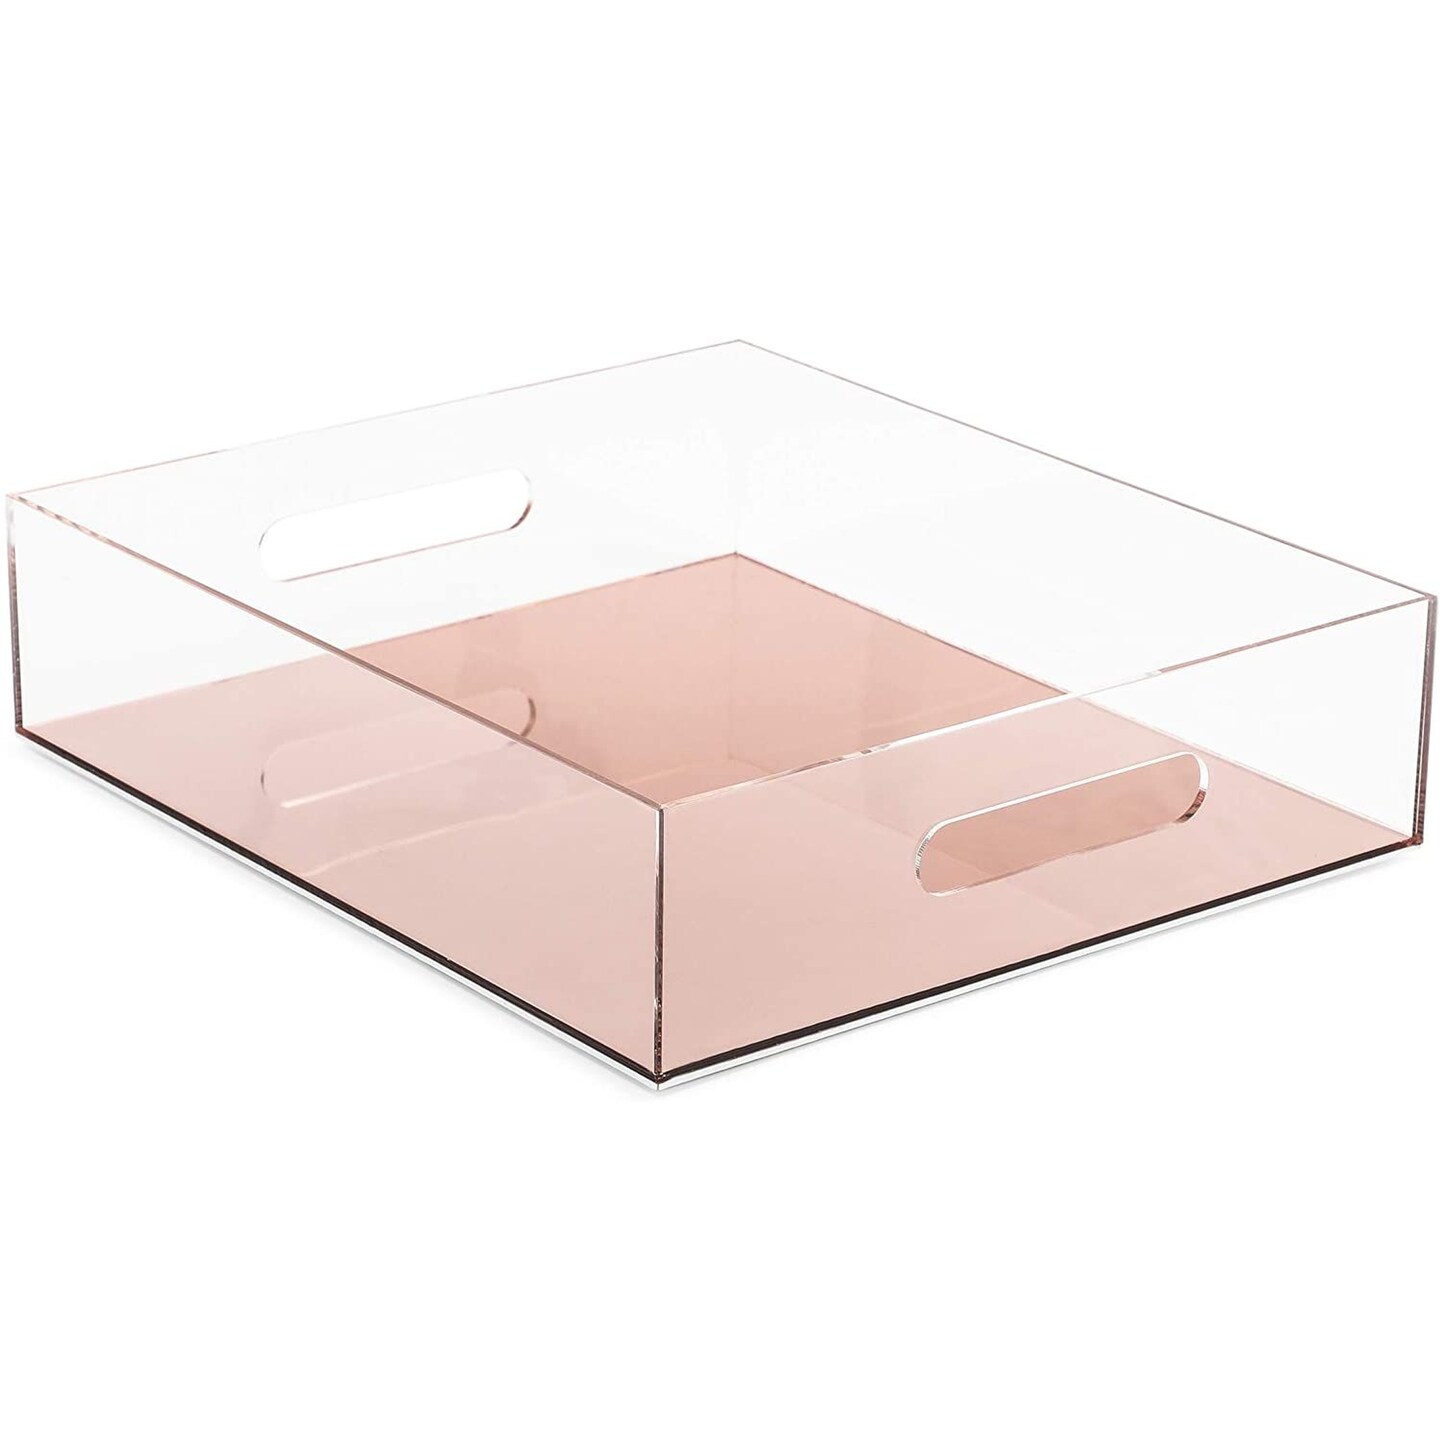 Rose Gold Acrylic Letter Tray, Clear Office Desk Organizer for Files,  Documents, Paper Storage (10.5 x 12 x 3 In)